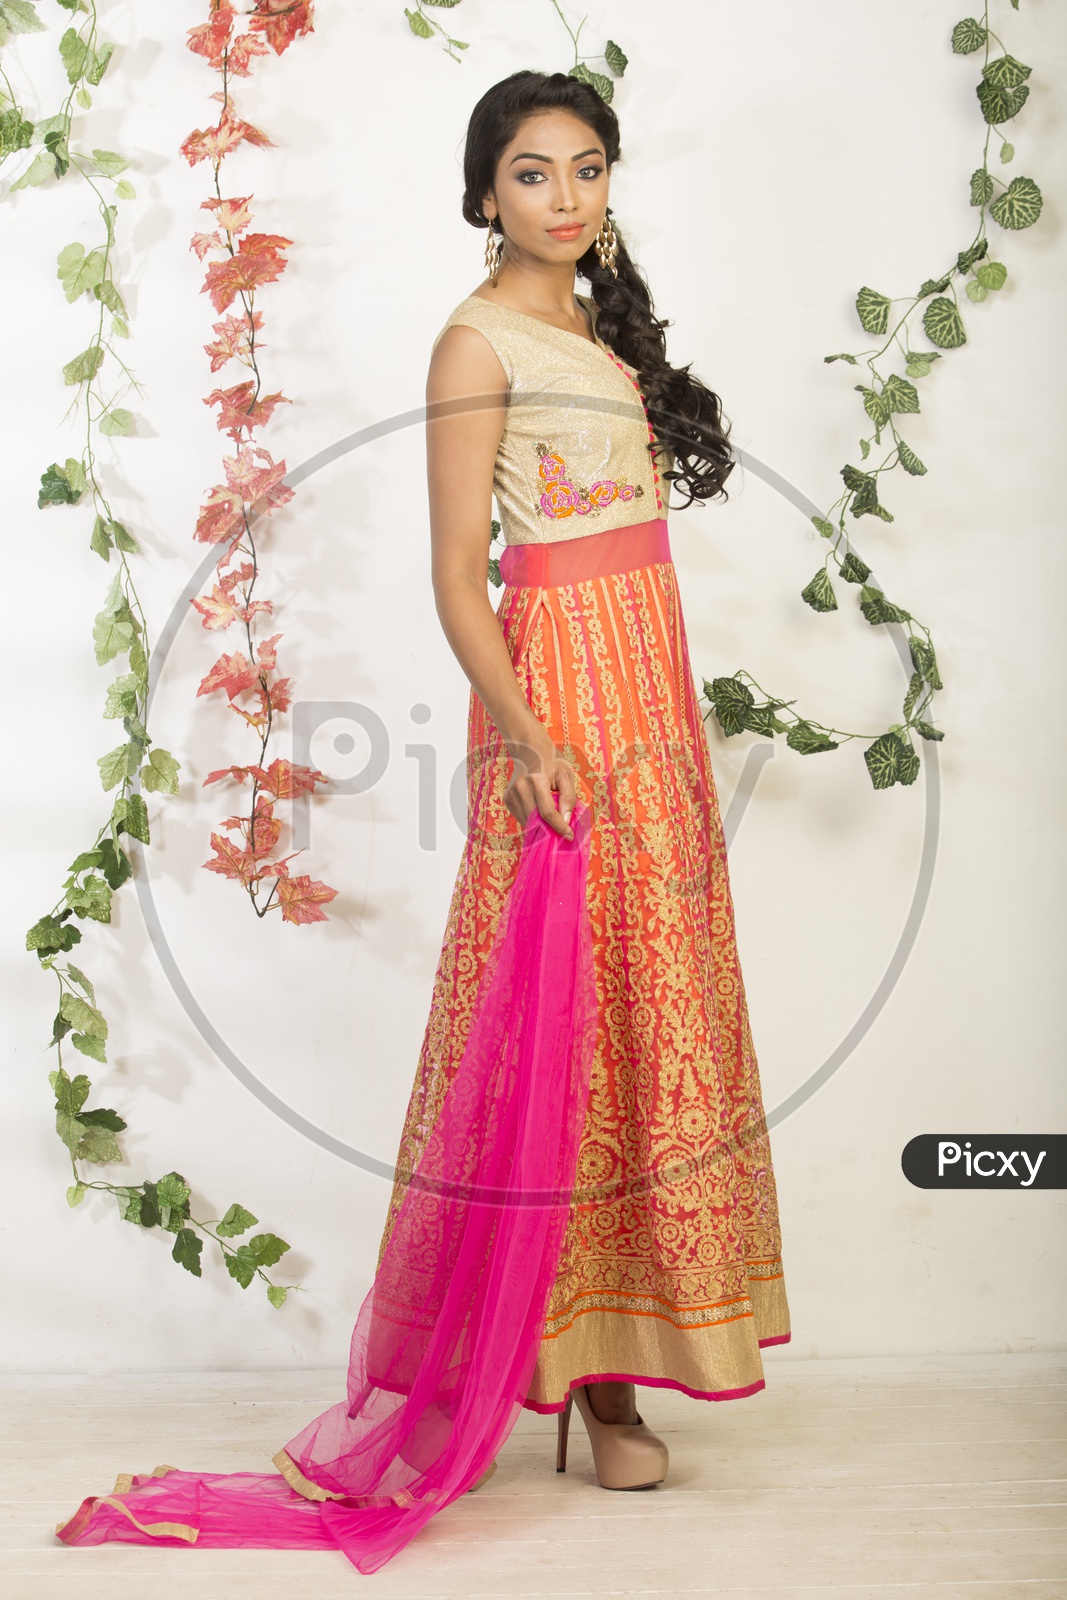 An Indian Female Model Wearing a Colorful  Chudidar Over  a Studio Setup and Smiling Looking to Camera